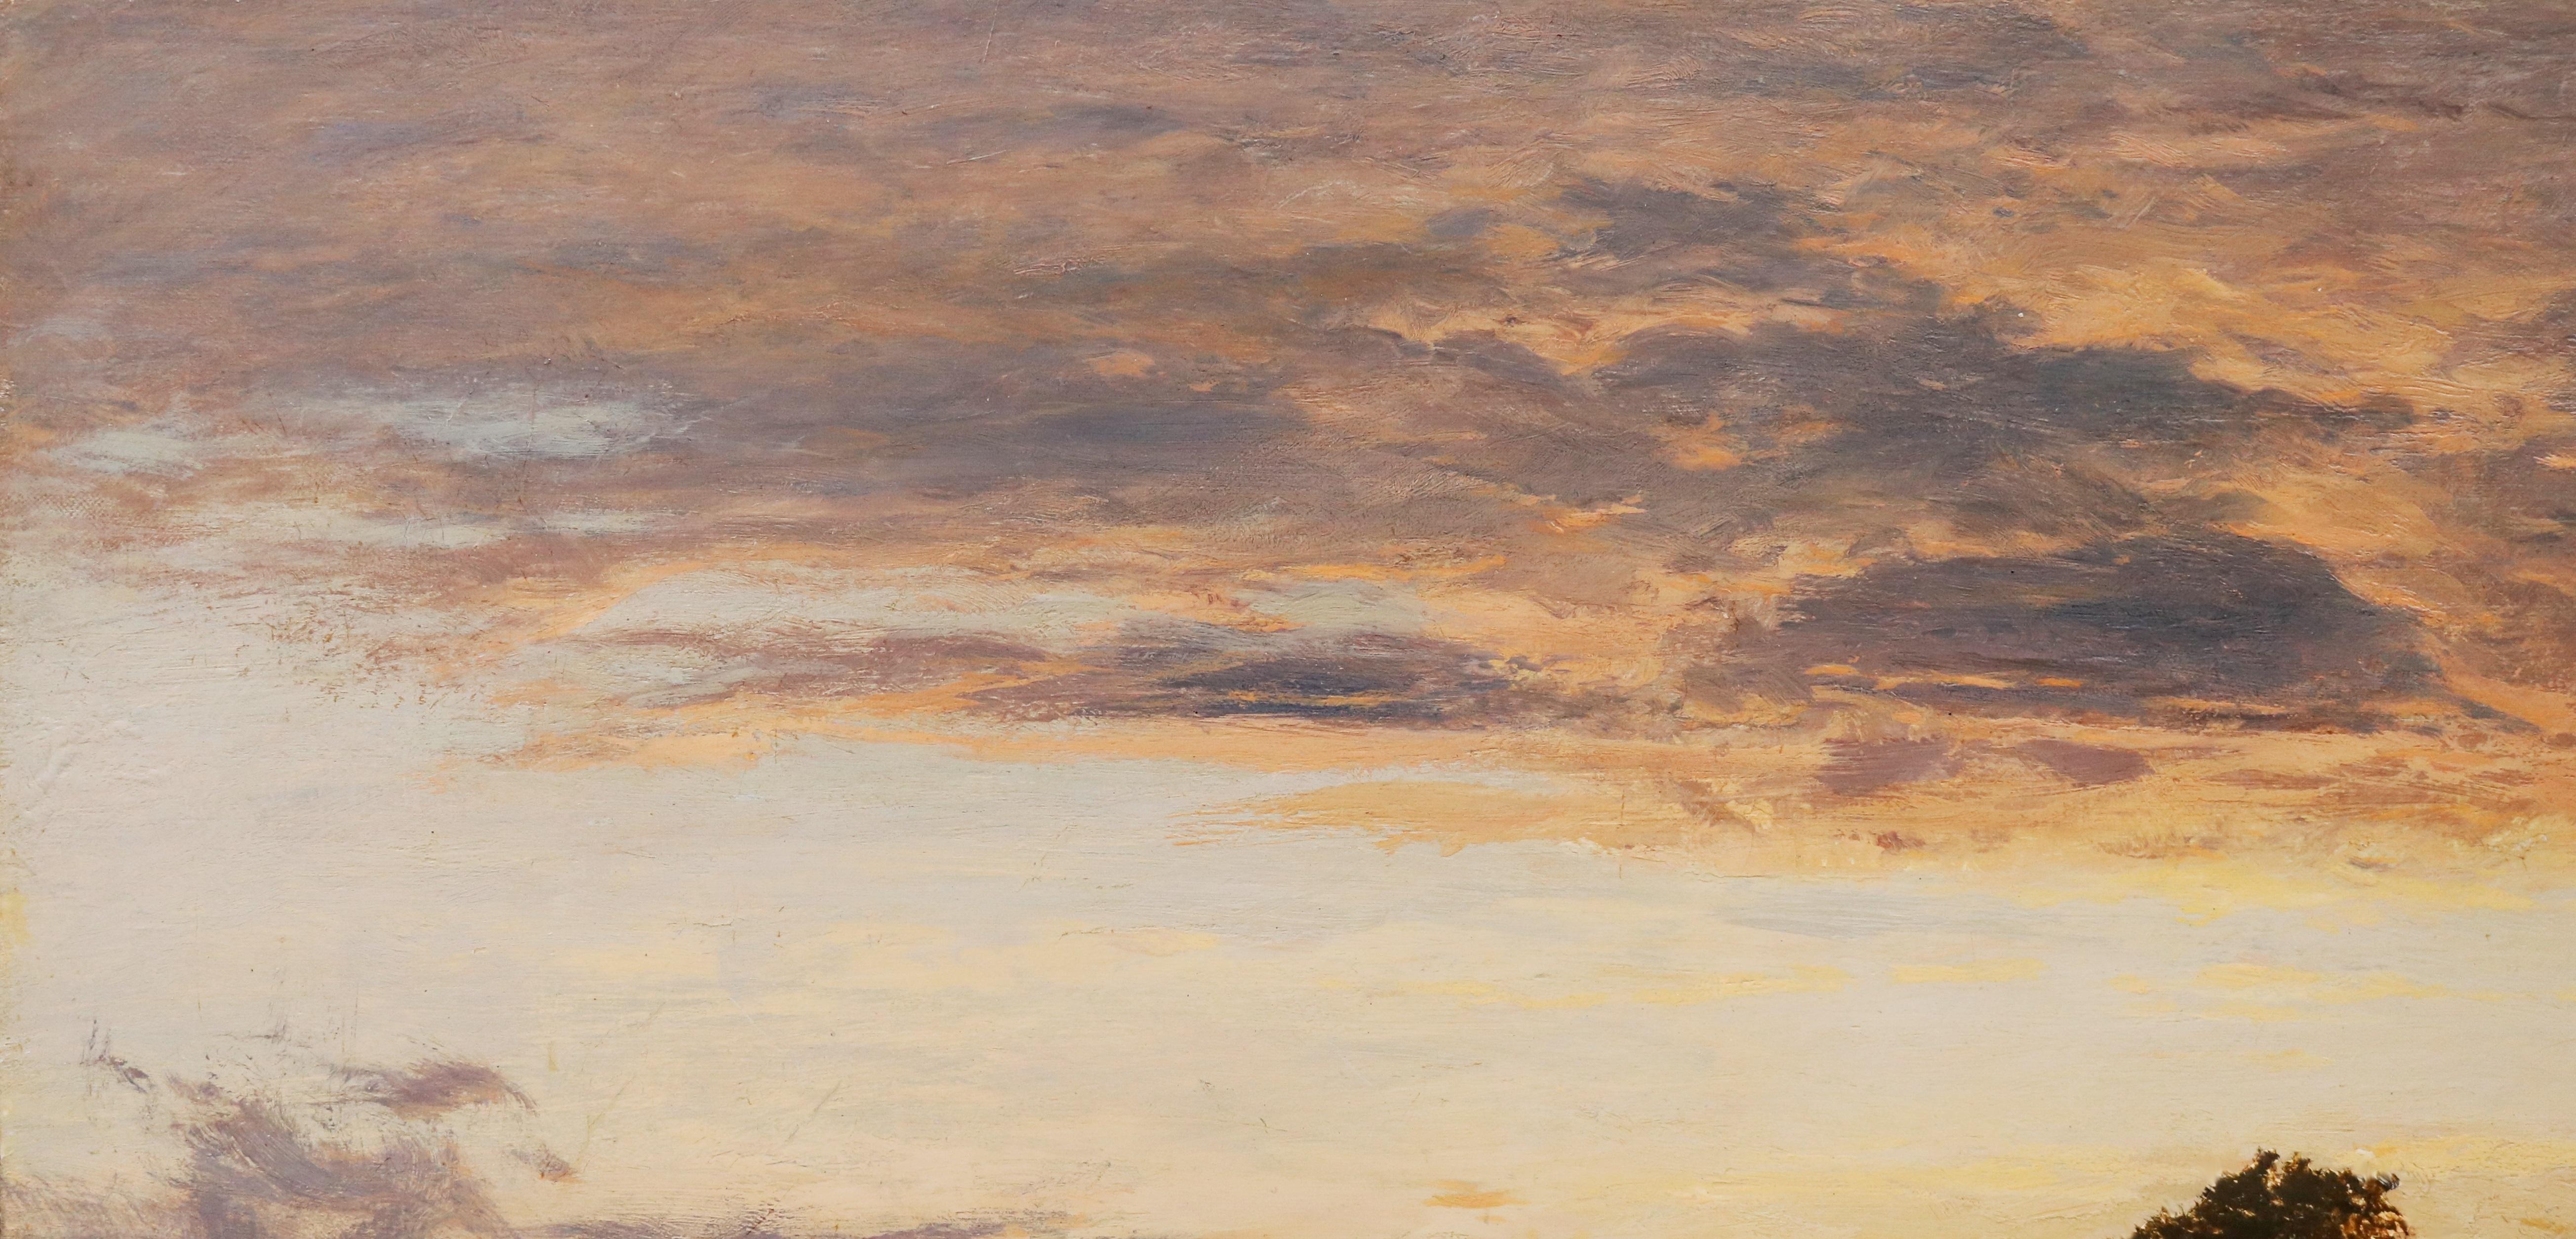 ‘Evening Glow’ by Benjamin Williams Leader (1831-1923). The painting – which depicts a dramatic sunset over an extensive Worcestershire country landscape - is signed by the artist and dated 1893. It is presented in a fine quality gold metal leaf